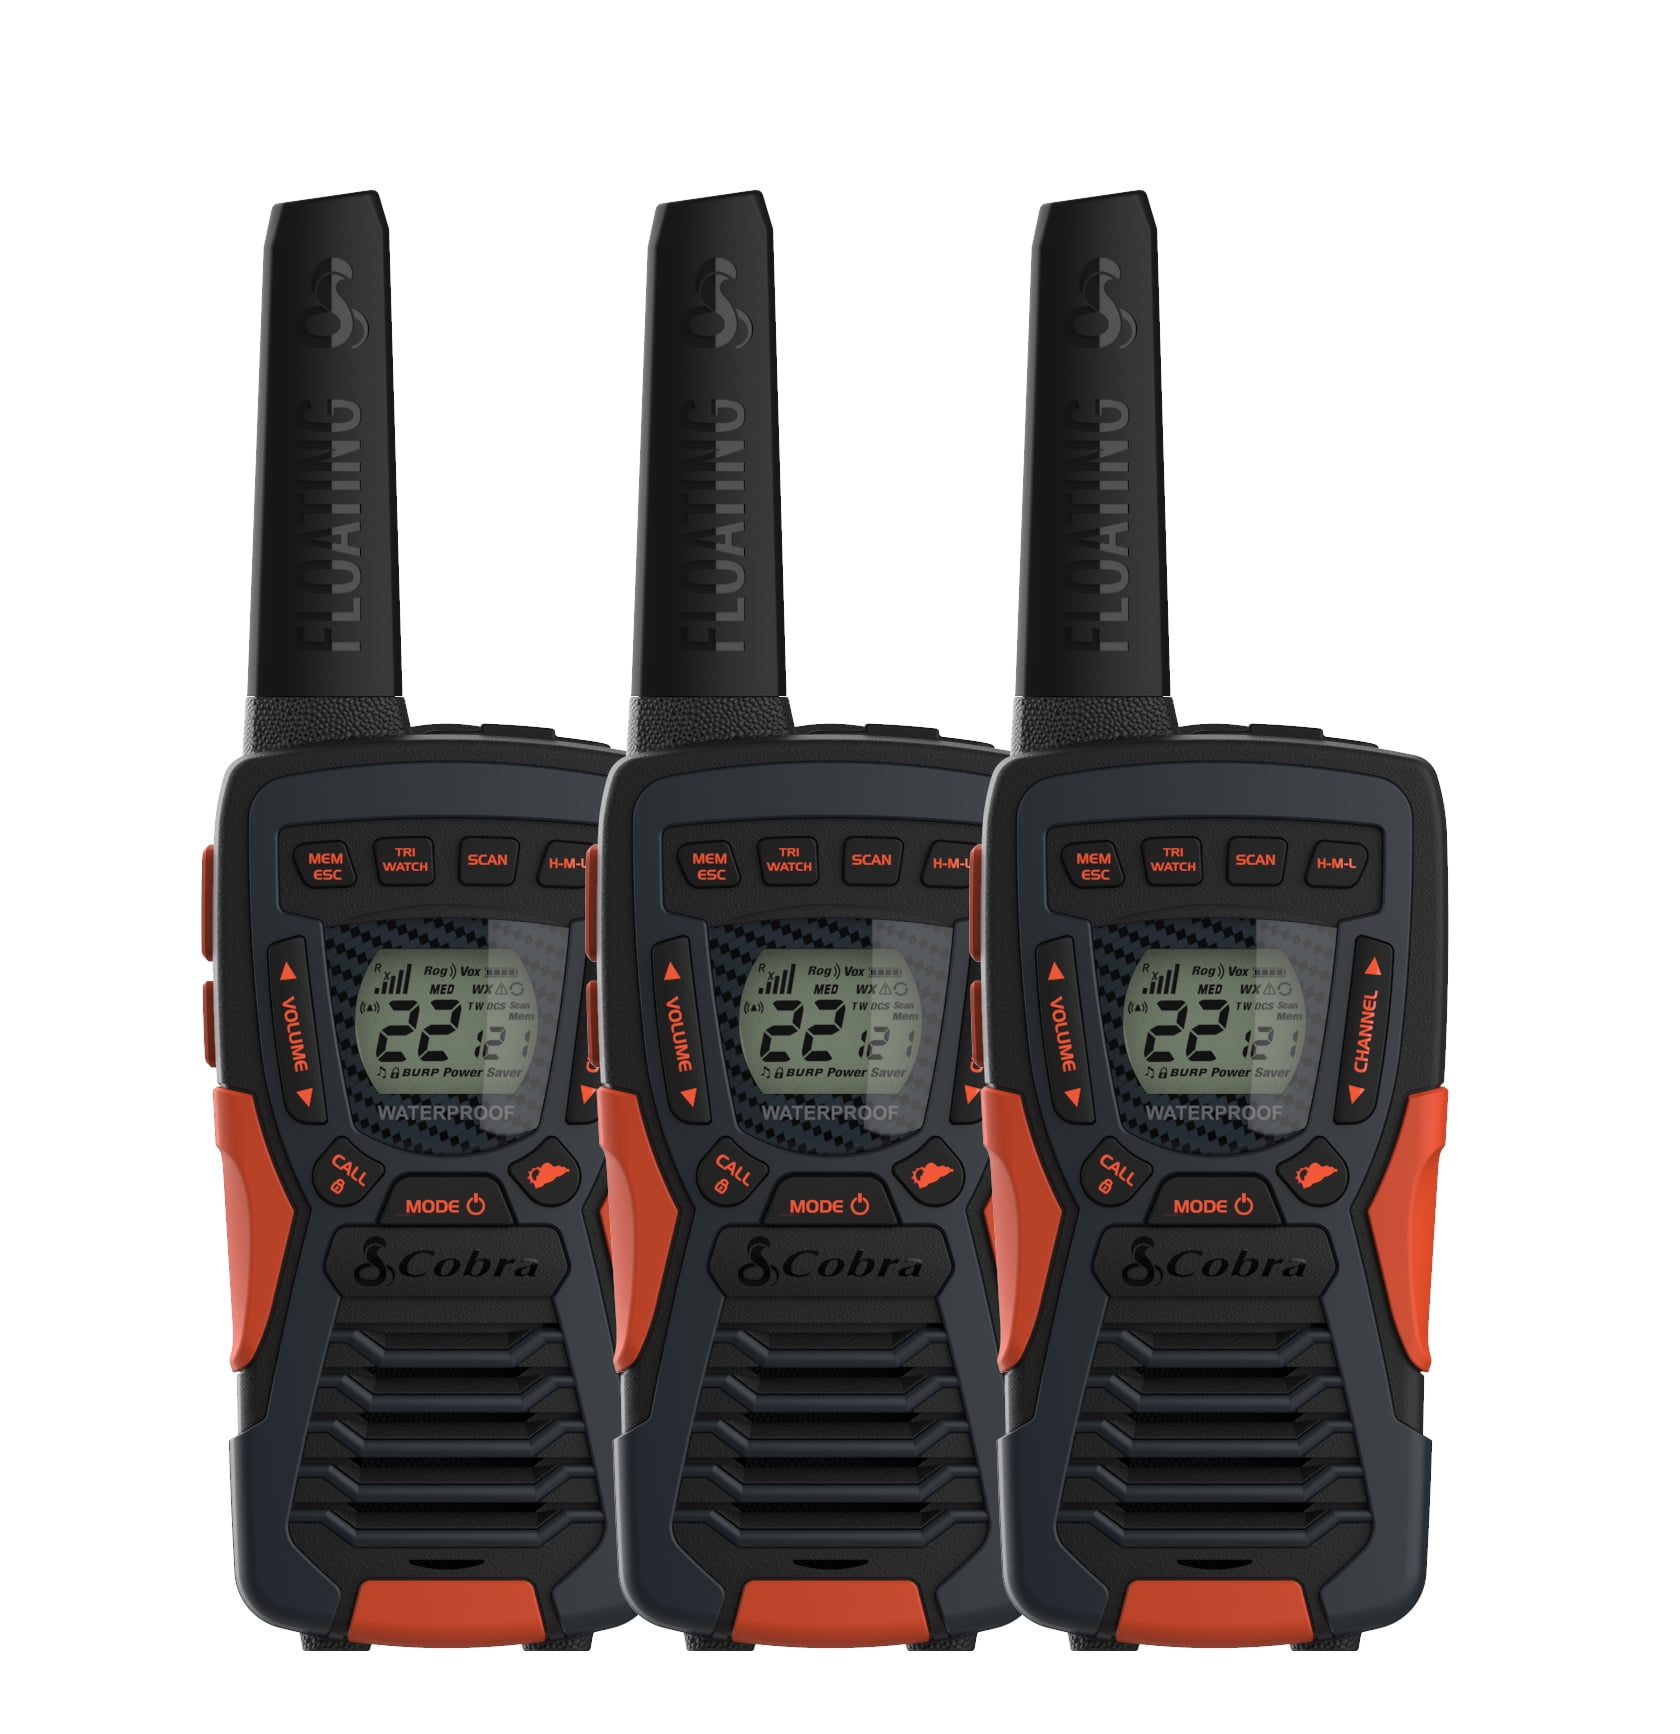 Cobra CXT10953PH-M Emergency Two-Way Radios, Waterproof Walkie Talkies, Up to 40 Mile Range, 22 Channels and NOAA Weather Channels, UHF FM Ultra-Clear - 3